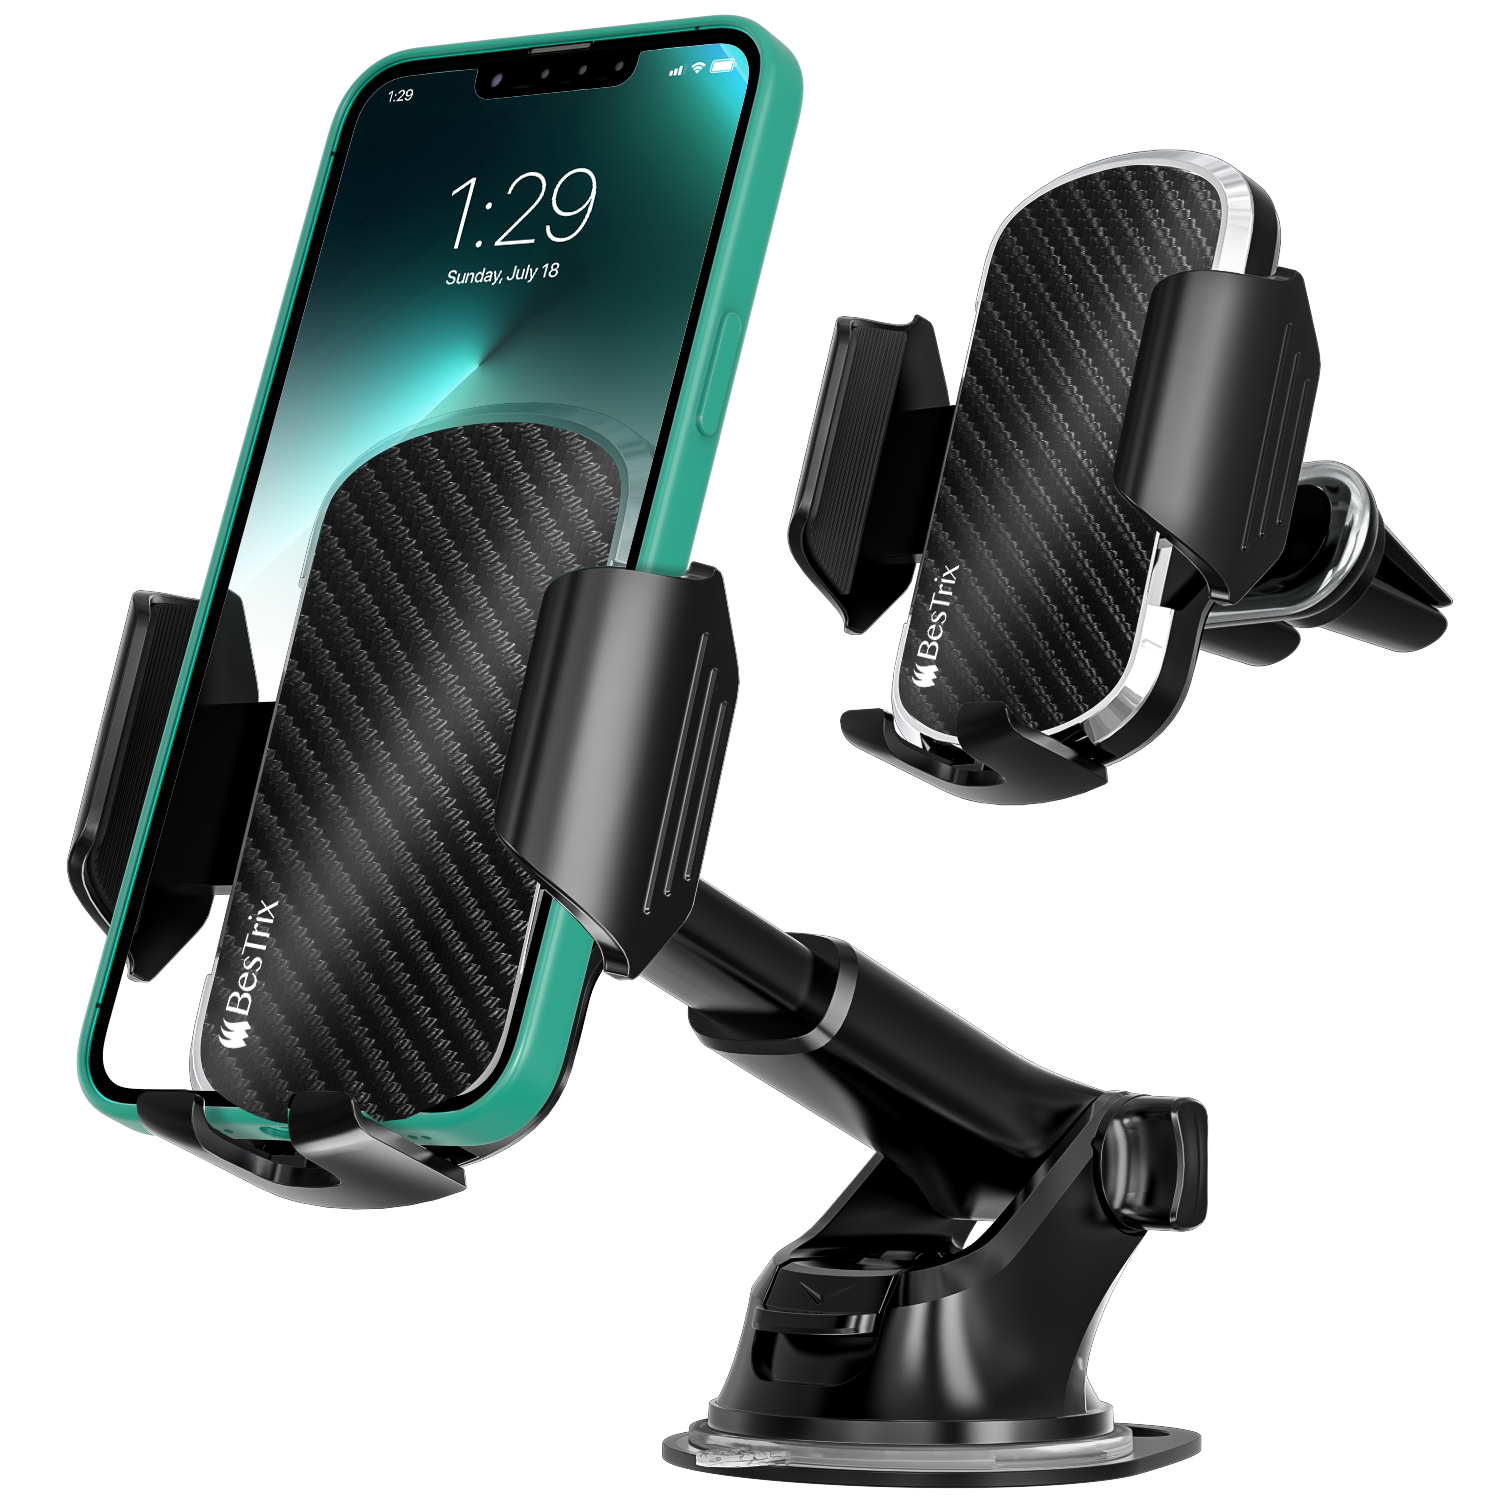 Bestrix Phone Mount for Car - Car Phone Holder Mount, Dashboard, Windshield, and Air Vent- for All Cars, Installs in Minutes - H